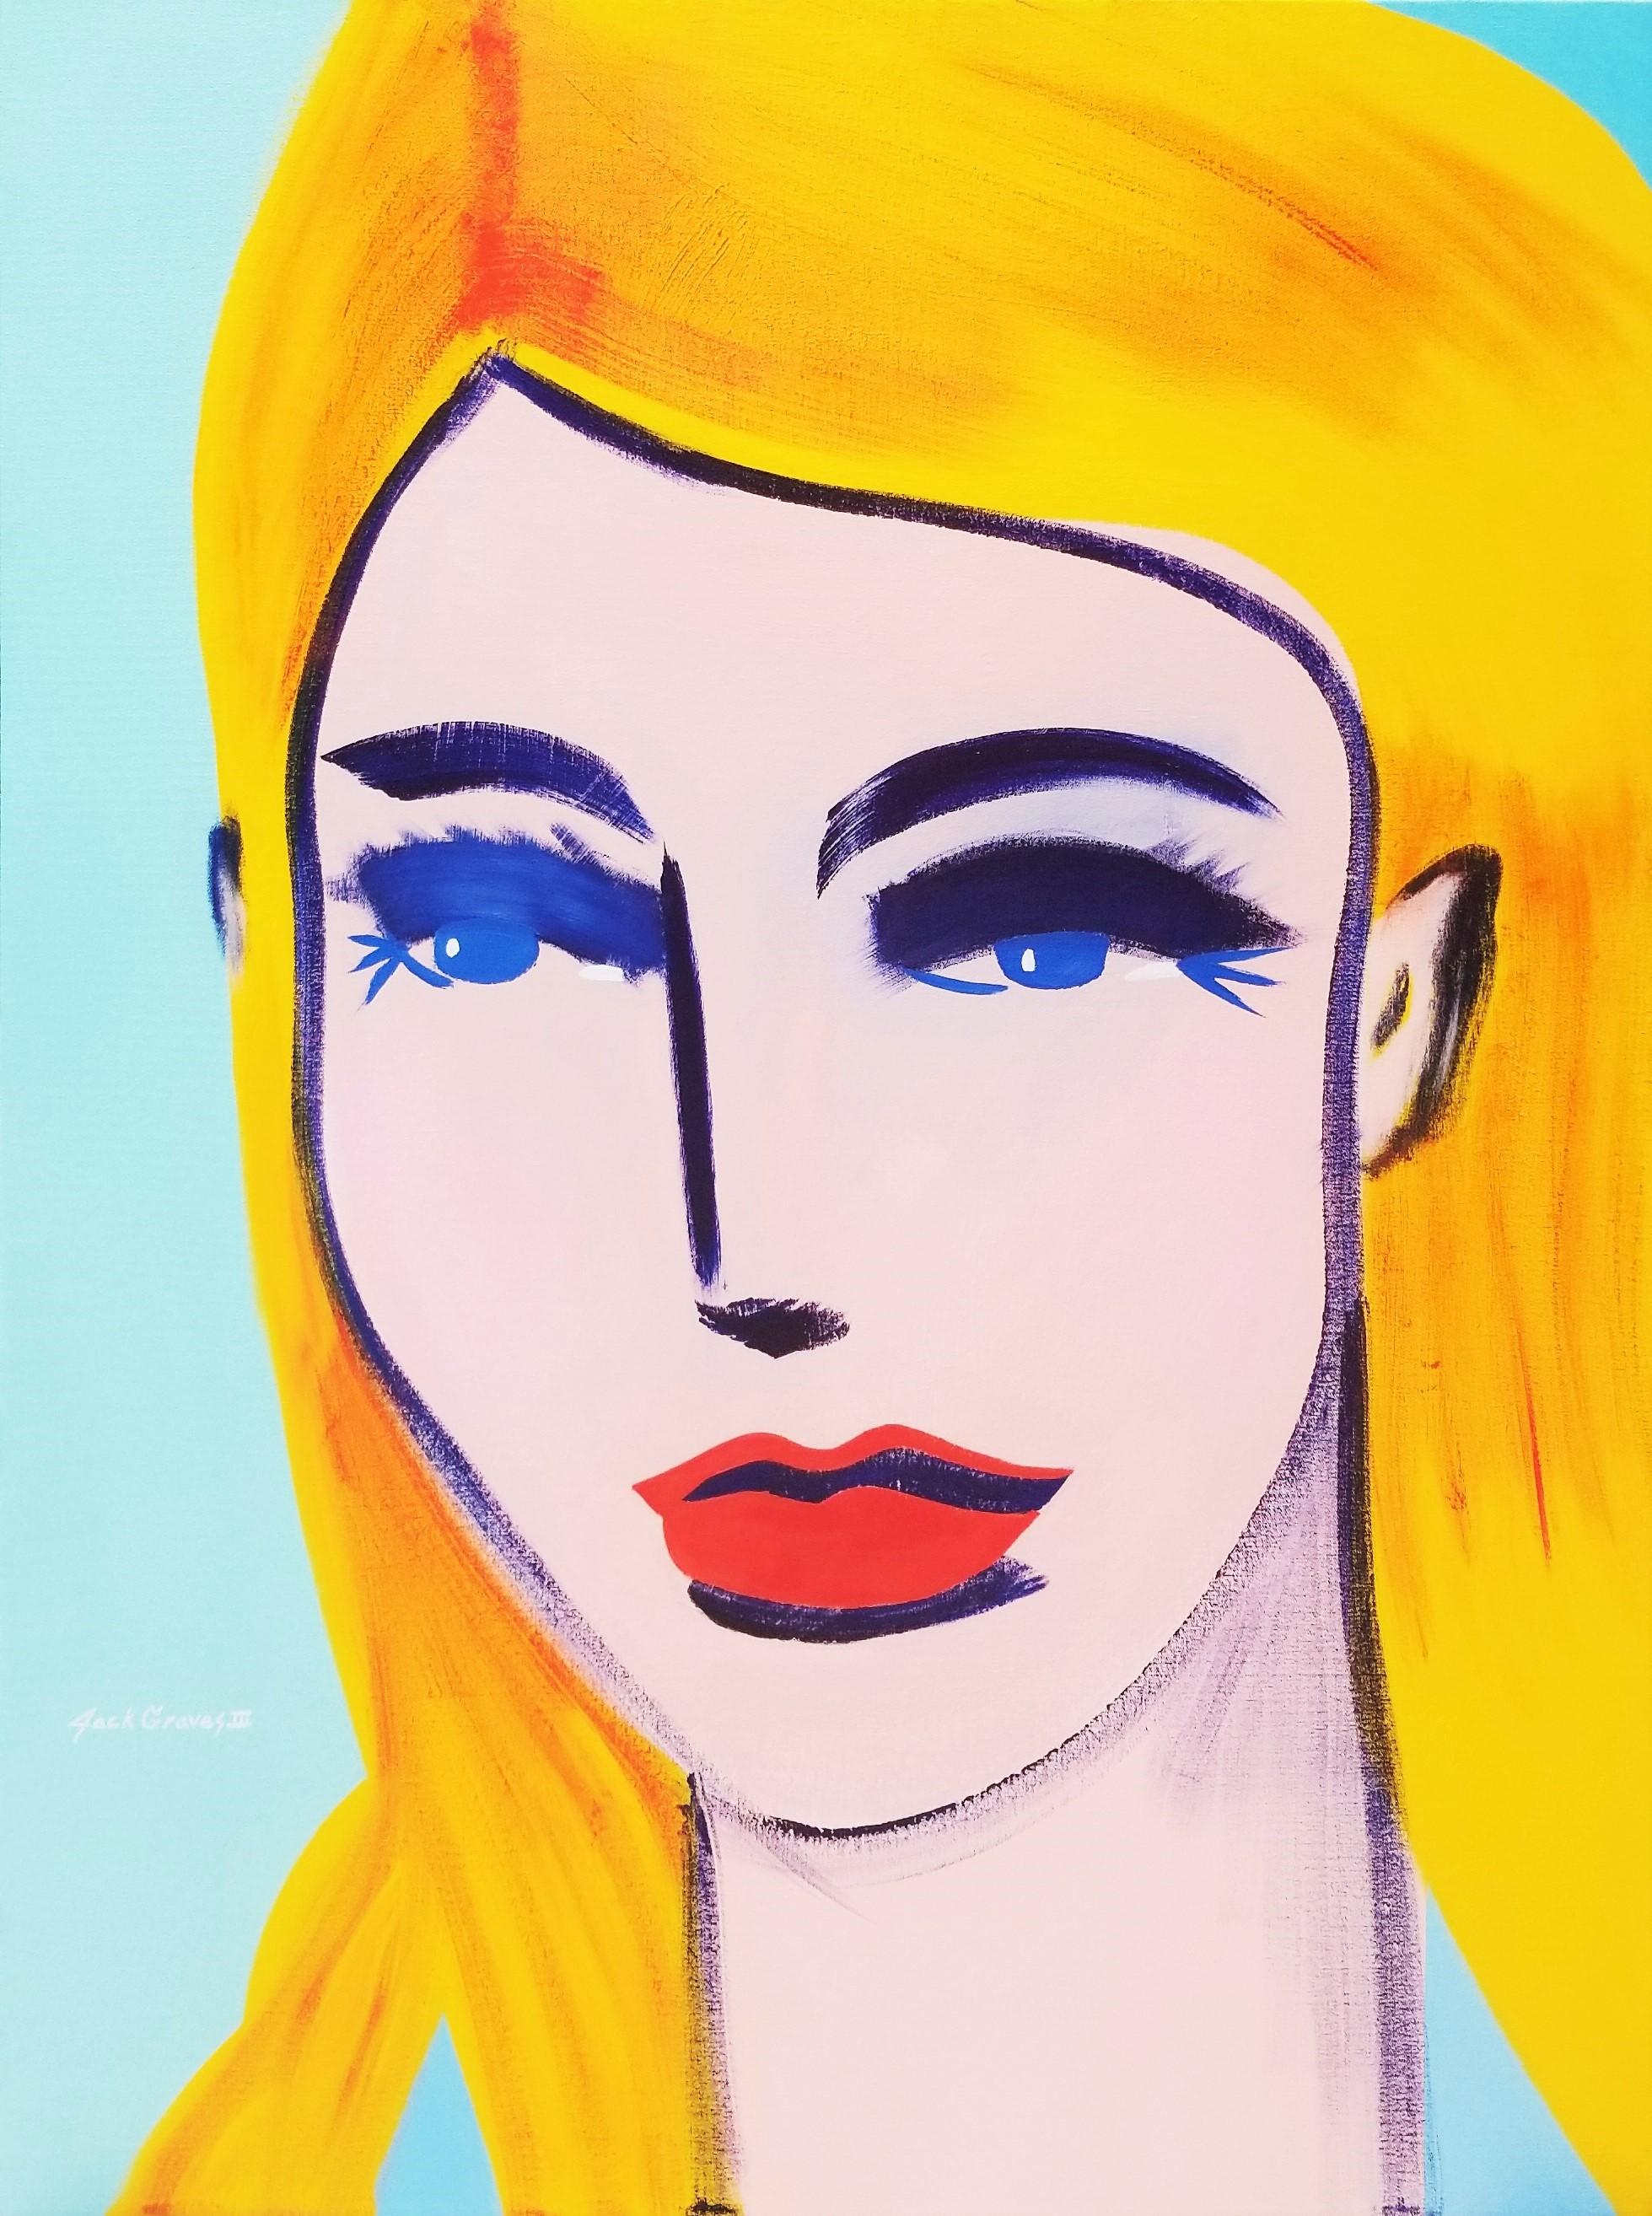 Artist: Jack Graves III (American, 1988-)
Title: "Female Face Icon X"
Series: Icon
*Signed by Graves lower left. It is also signed, dated, and titled on verso
Year: 2023
Medium: Original Acrylic Painting on Canvas
Canvas size: 48" x 36"
Condition: